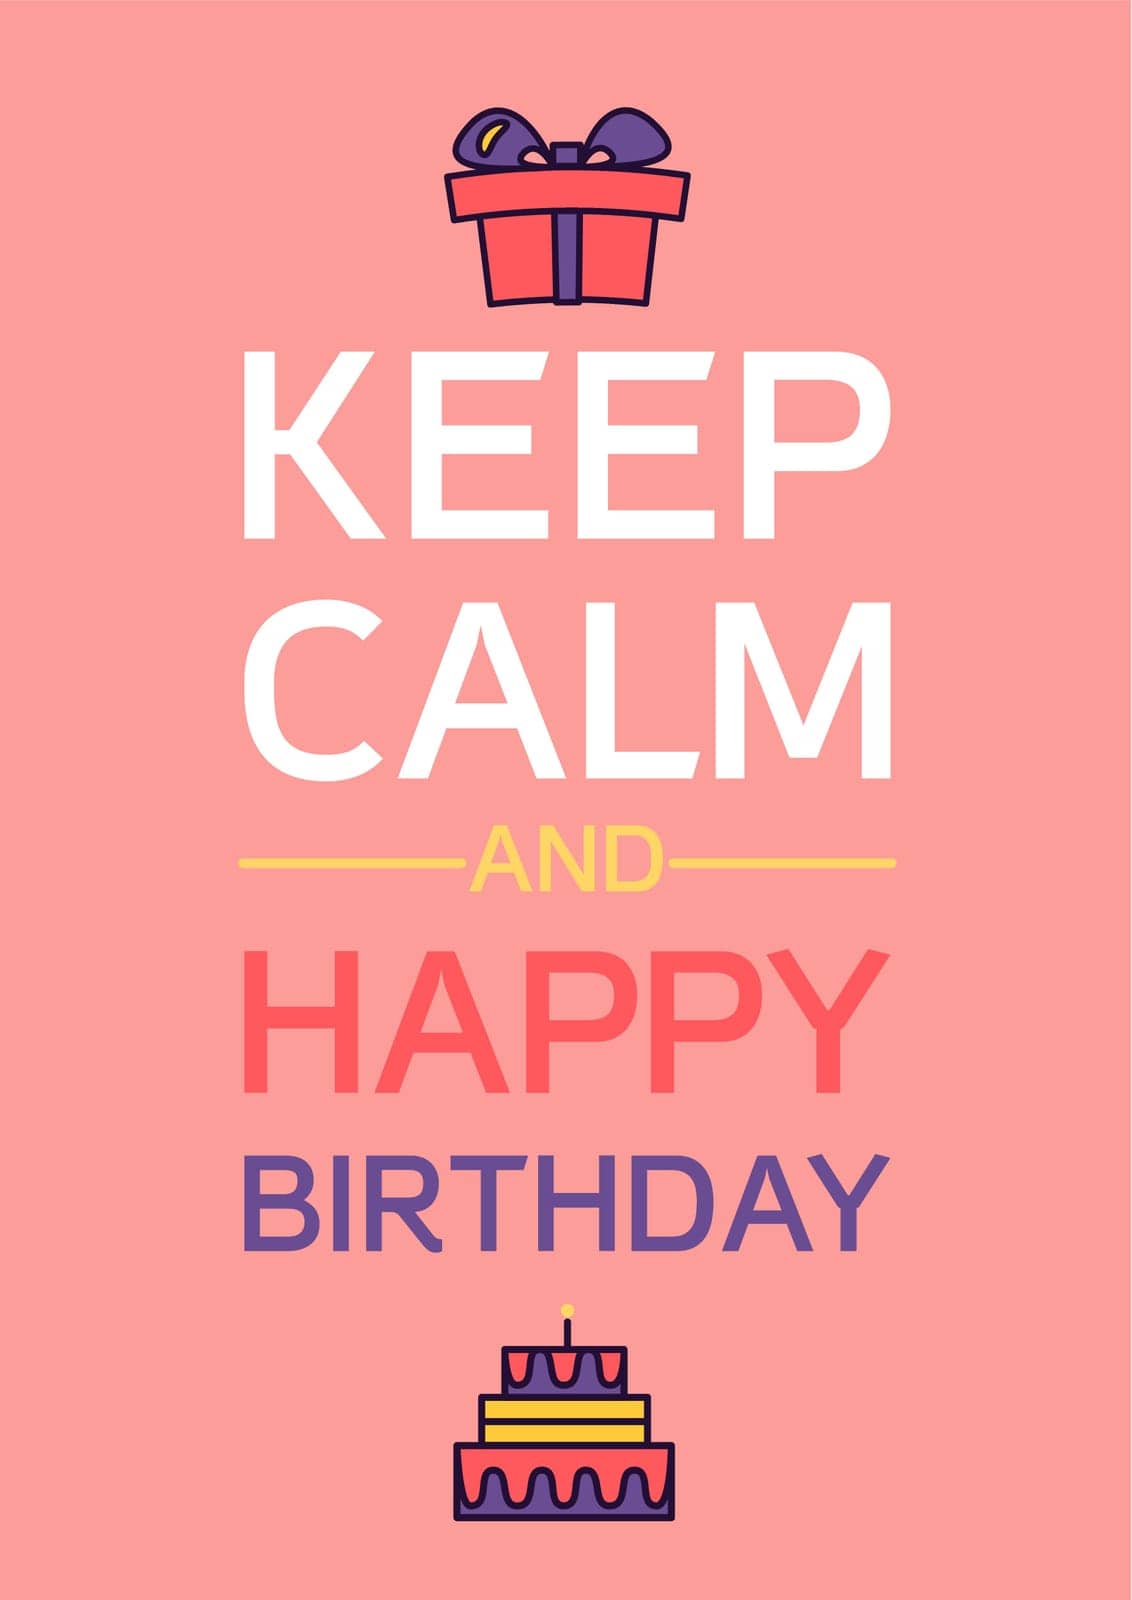 Happy Birthday And Keep Calm Poster. Celebration Greeting Card. Vector